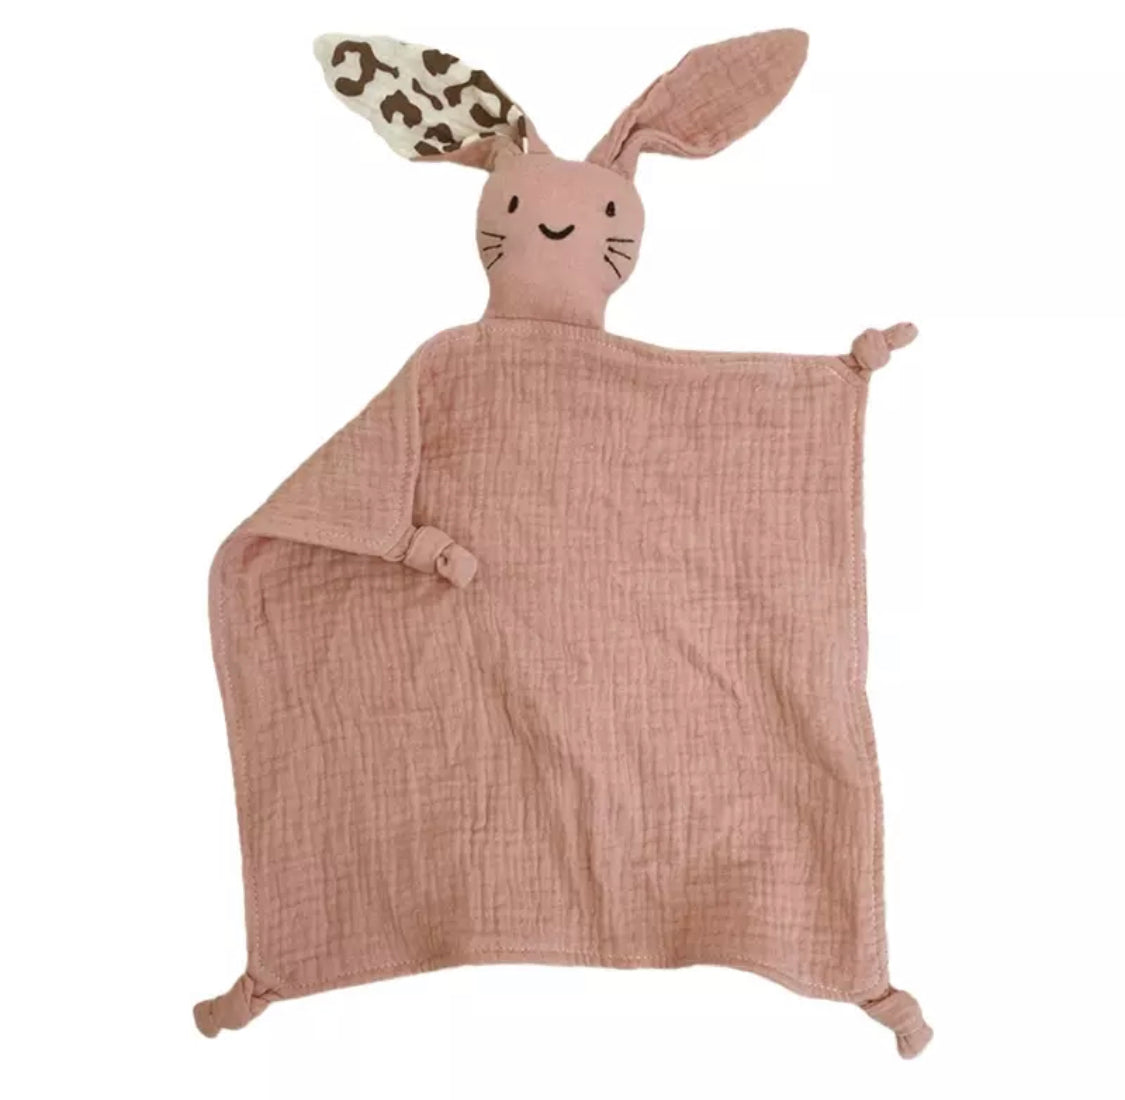 100% Organic Bunny Muslin Cotton comforter. This cute and buttery soft bunny is perfect for snuggling, playtime and sleeping.